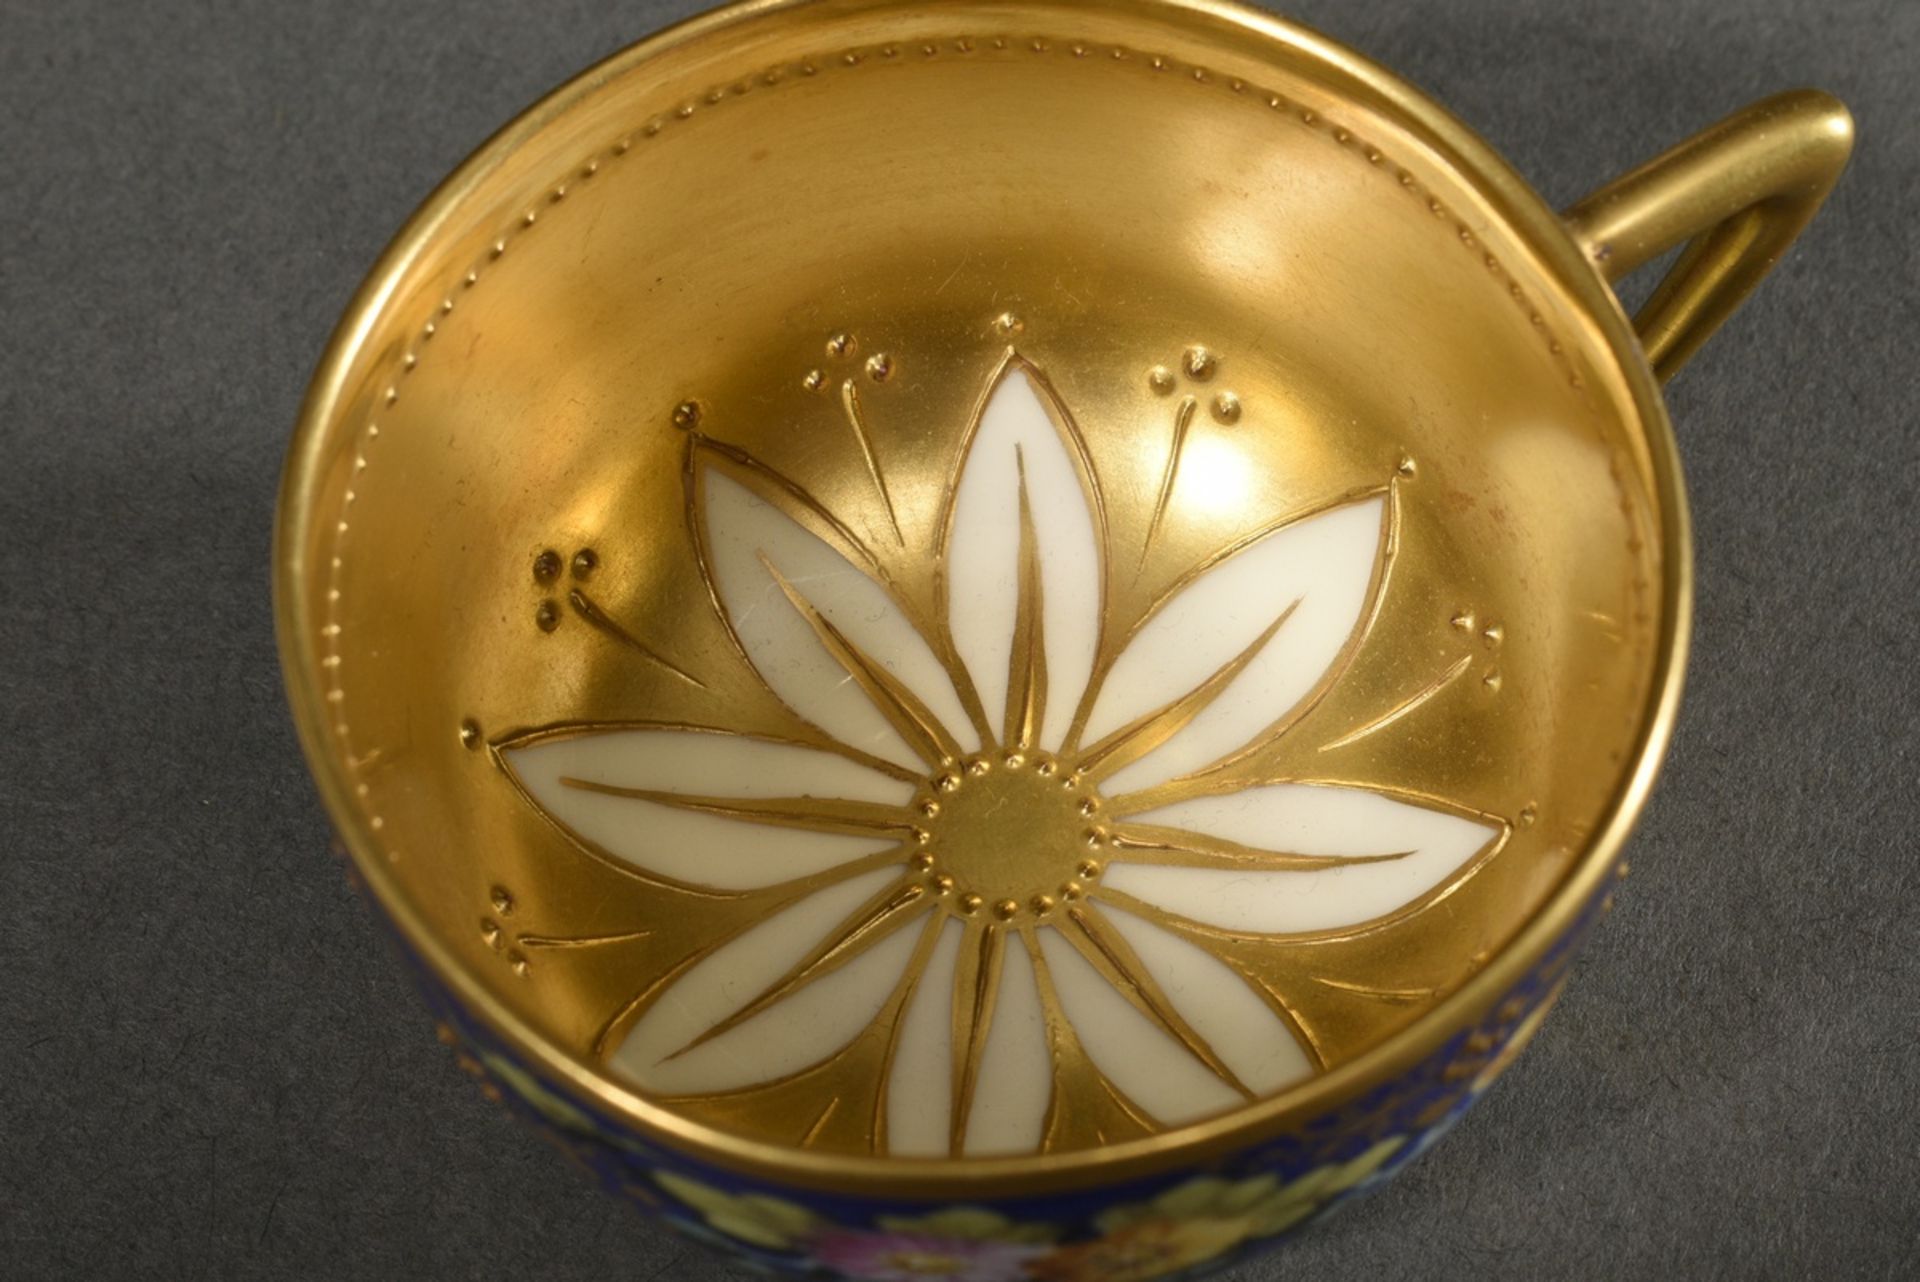 Magnificent demitasse cups/saucers with polychrome floral painting and pastose gold decoration on a - Image 3 of 5